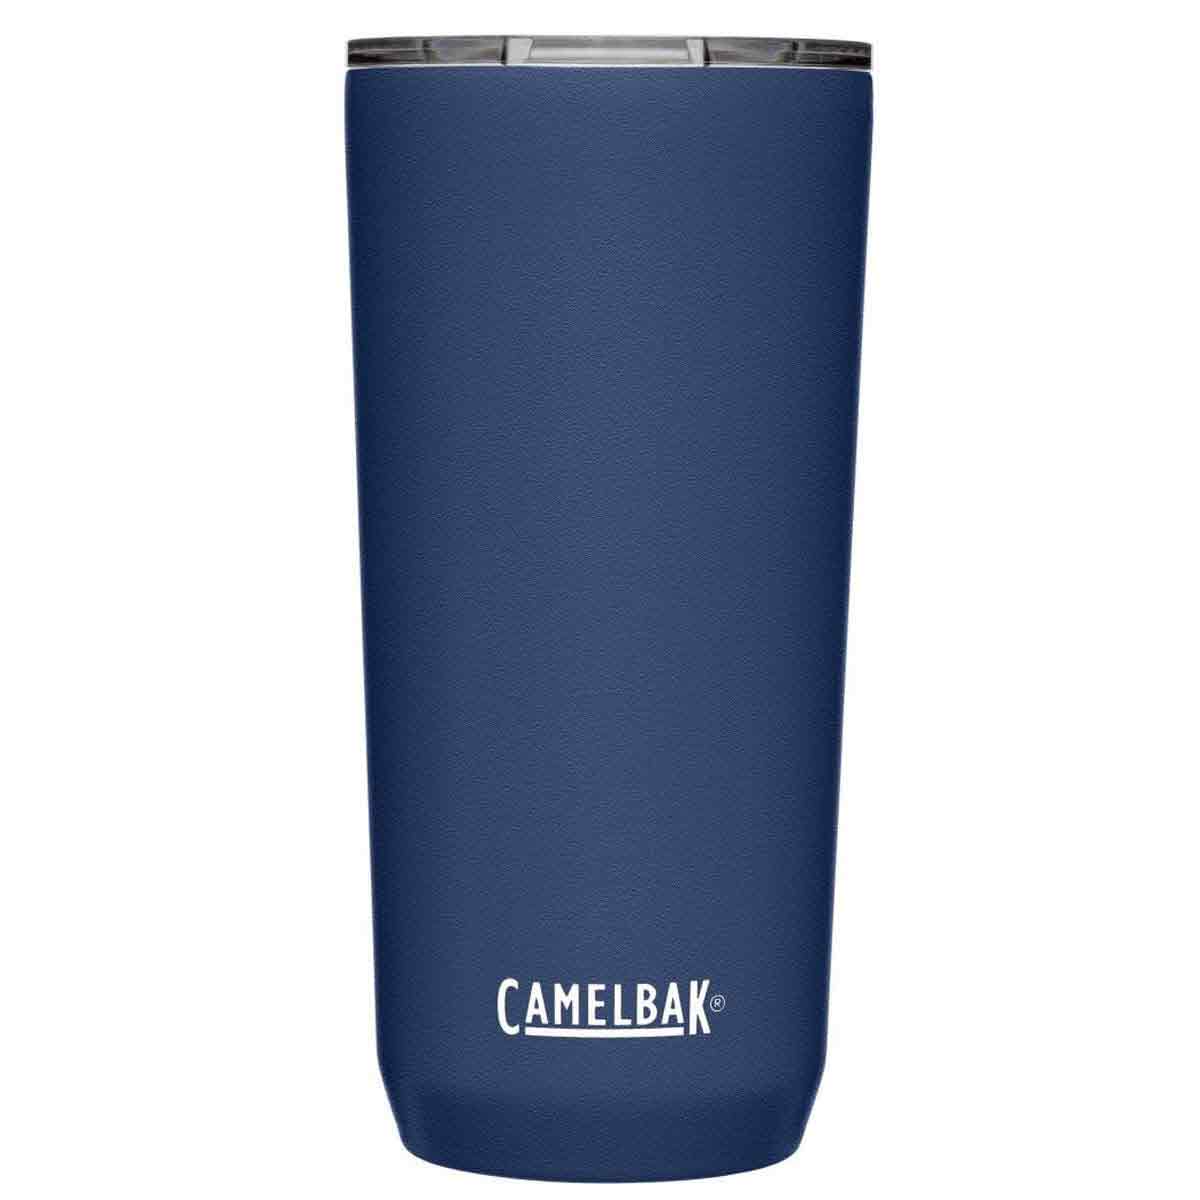 Camelbak Forge Flow Stainless Steel Vac Insulated Bottle 16oz - High  Mountain Sports